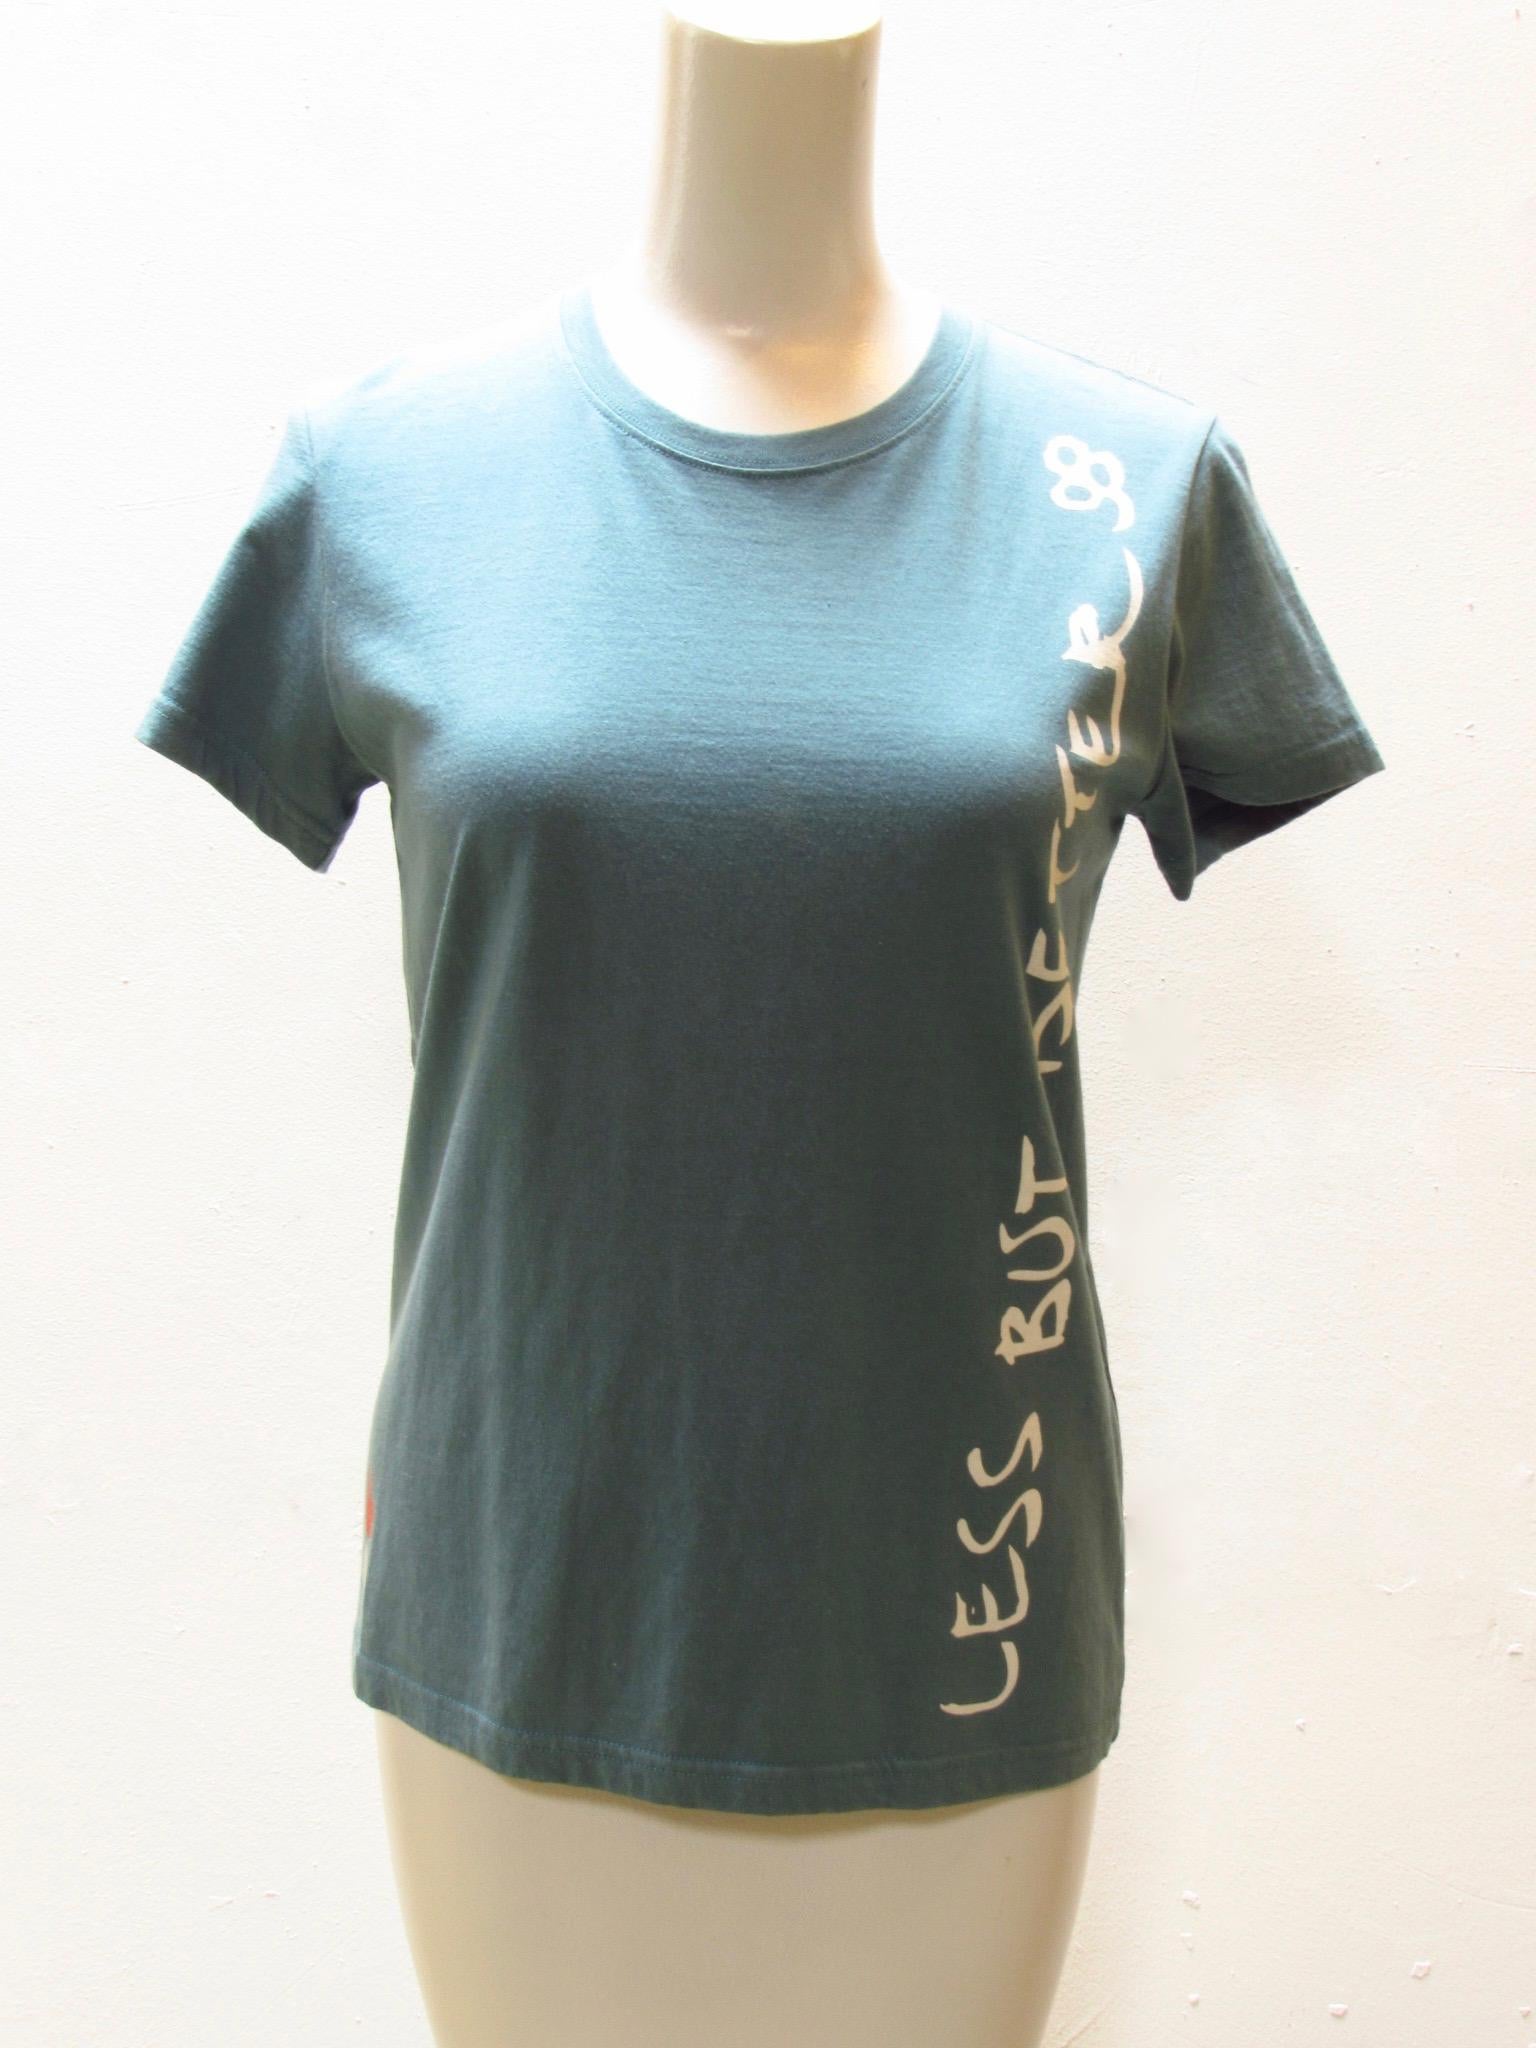 This blue grey cotton tee comes to you from vintage Undercover. 